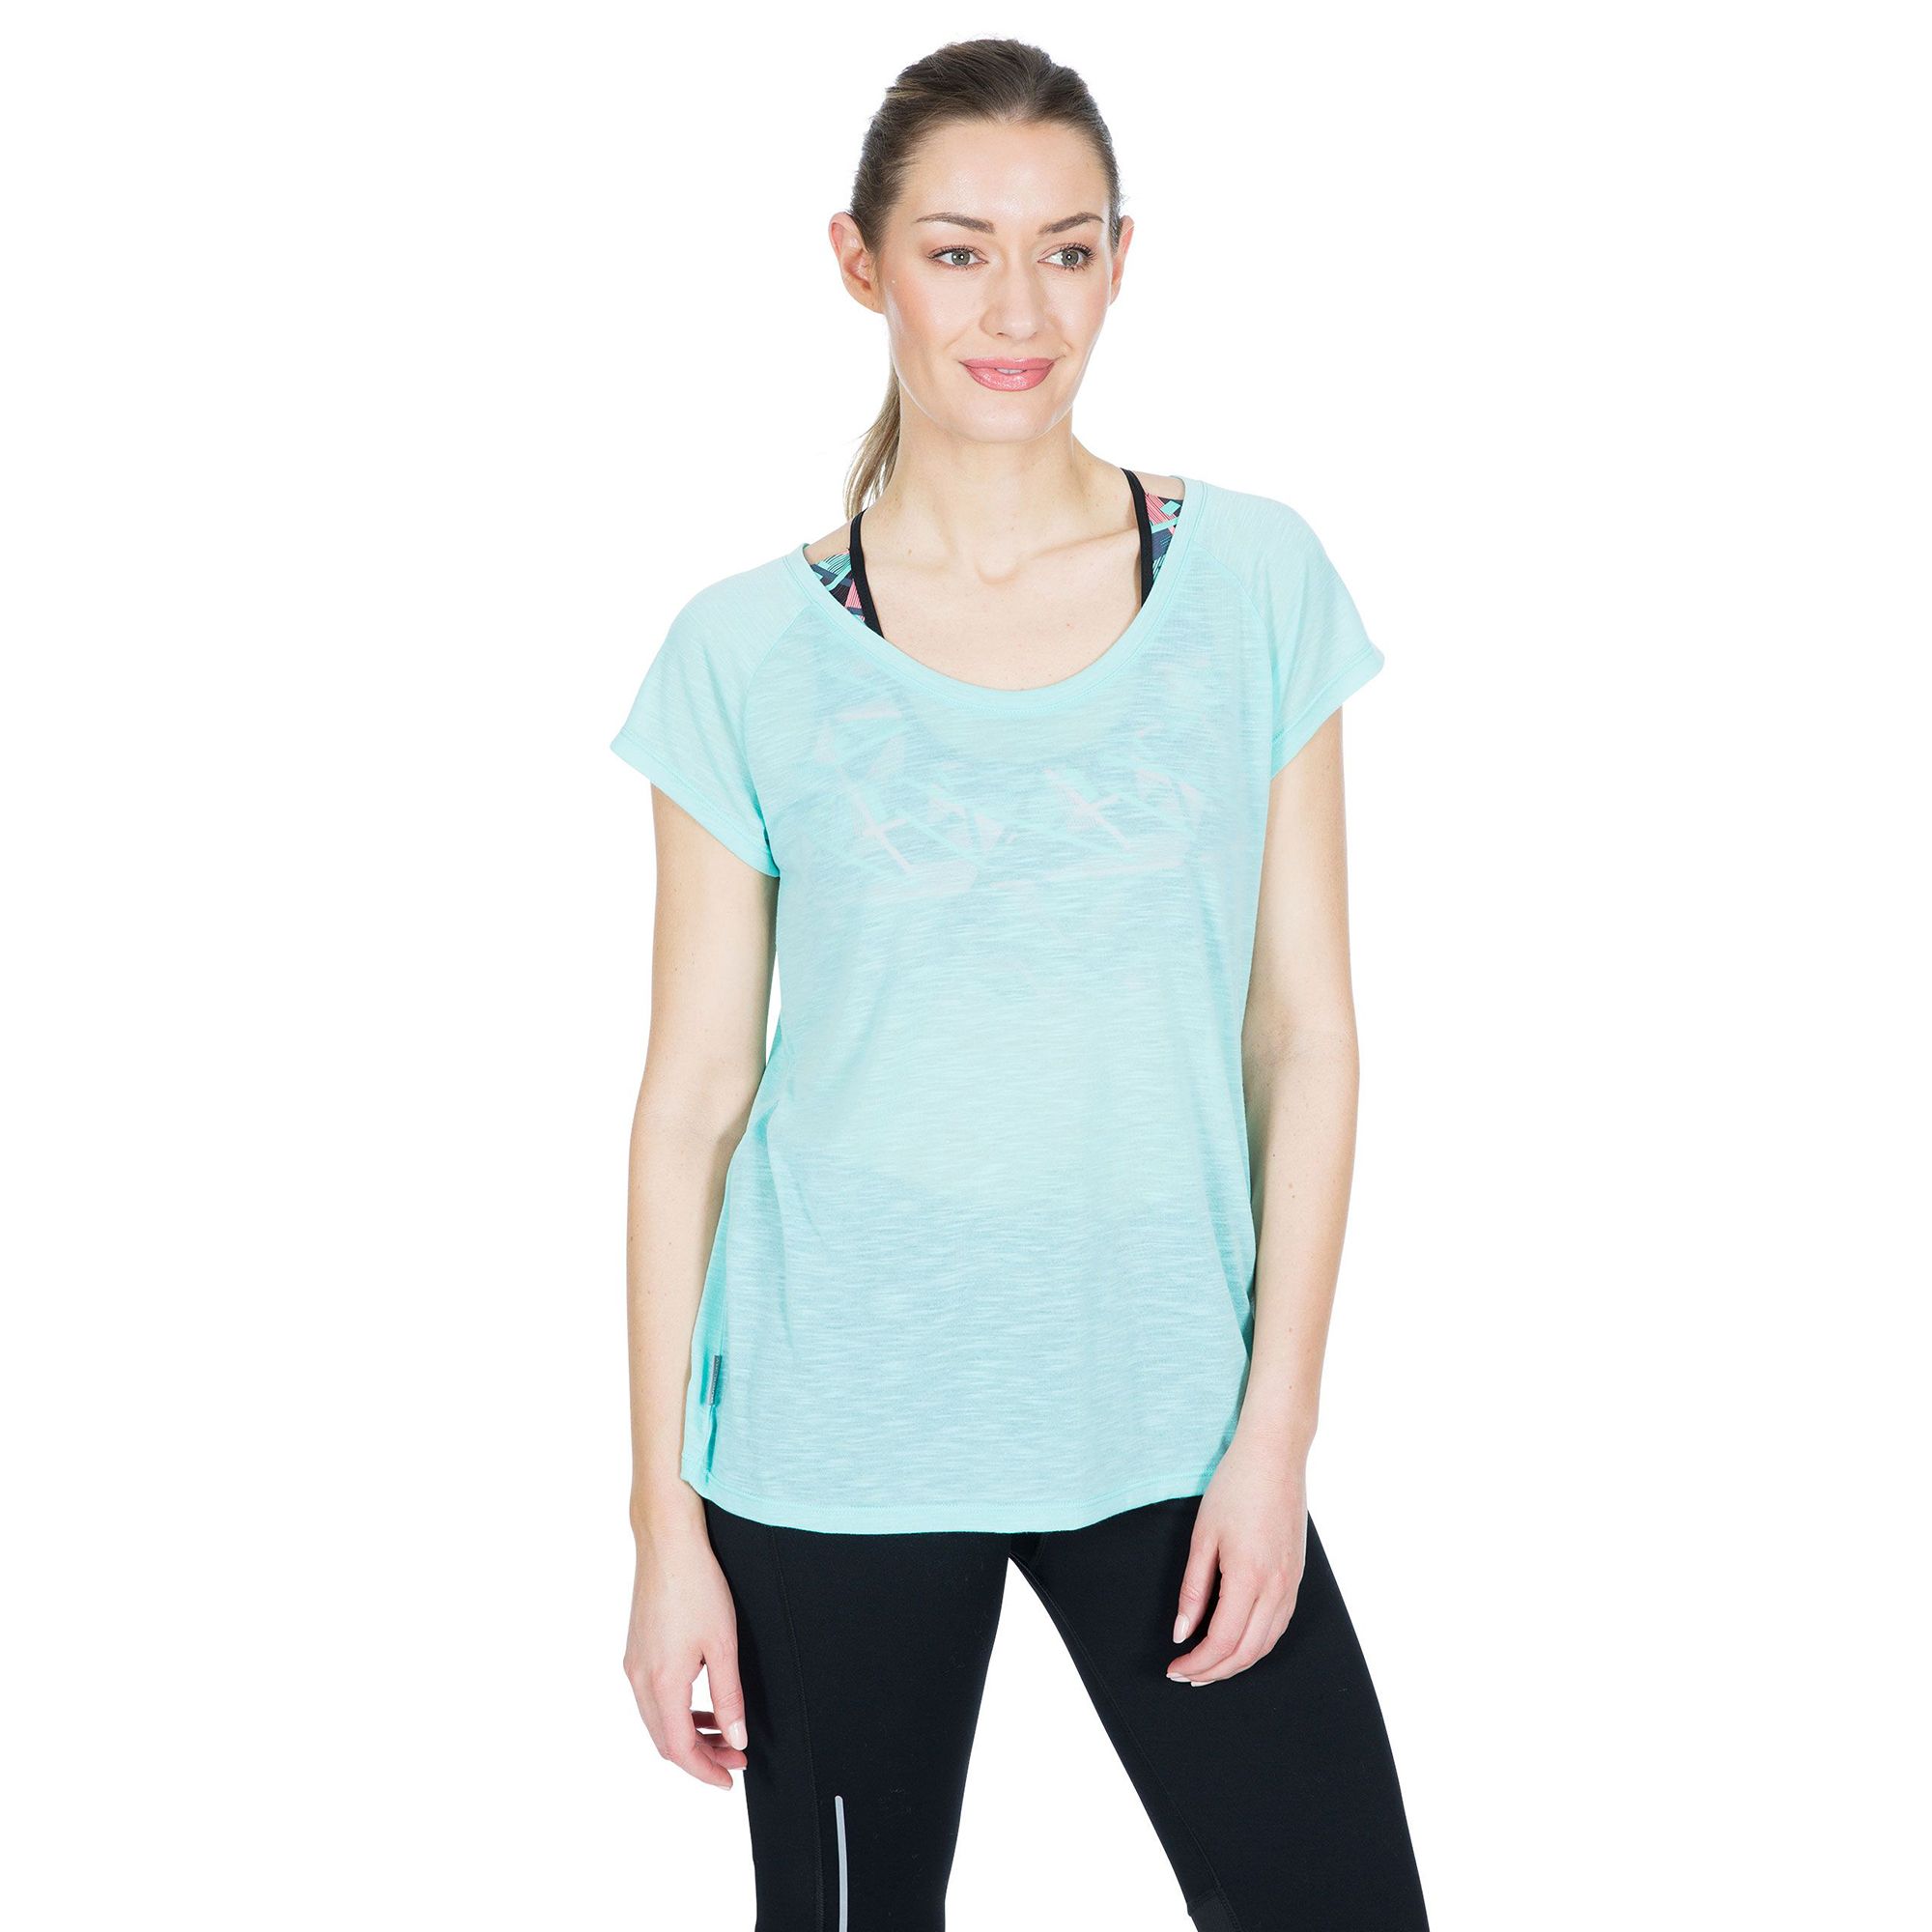 Short sleeve. Scooped neck. Relaxed fit. Contrast inner back neck binding. Reflective printed logos. Quick dry. 100% Polyester. Trespass Womens Chest Sizing (approx): XS/8 - 32in/81cm, S/10 - 34in/86cm, M/12 - 36in/91.4cm, L/14 - 38in/96.5cm, XL/16 - 40in/101.5cm, XXL/18 - 42in/106.5cm.